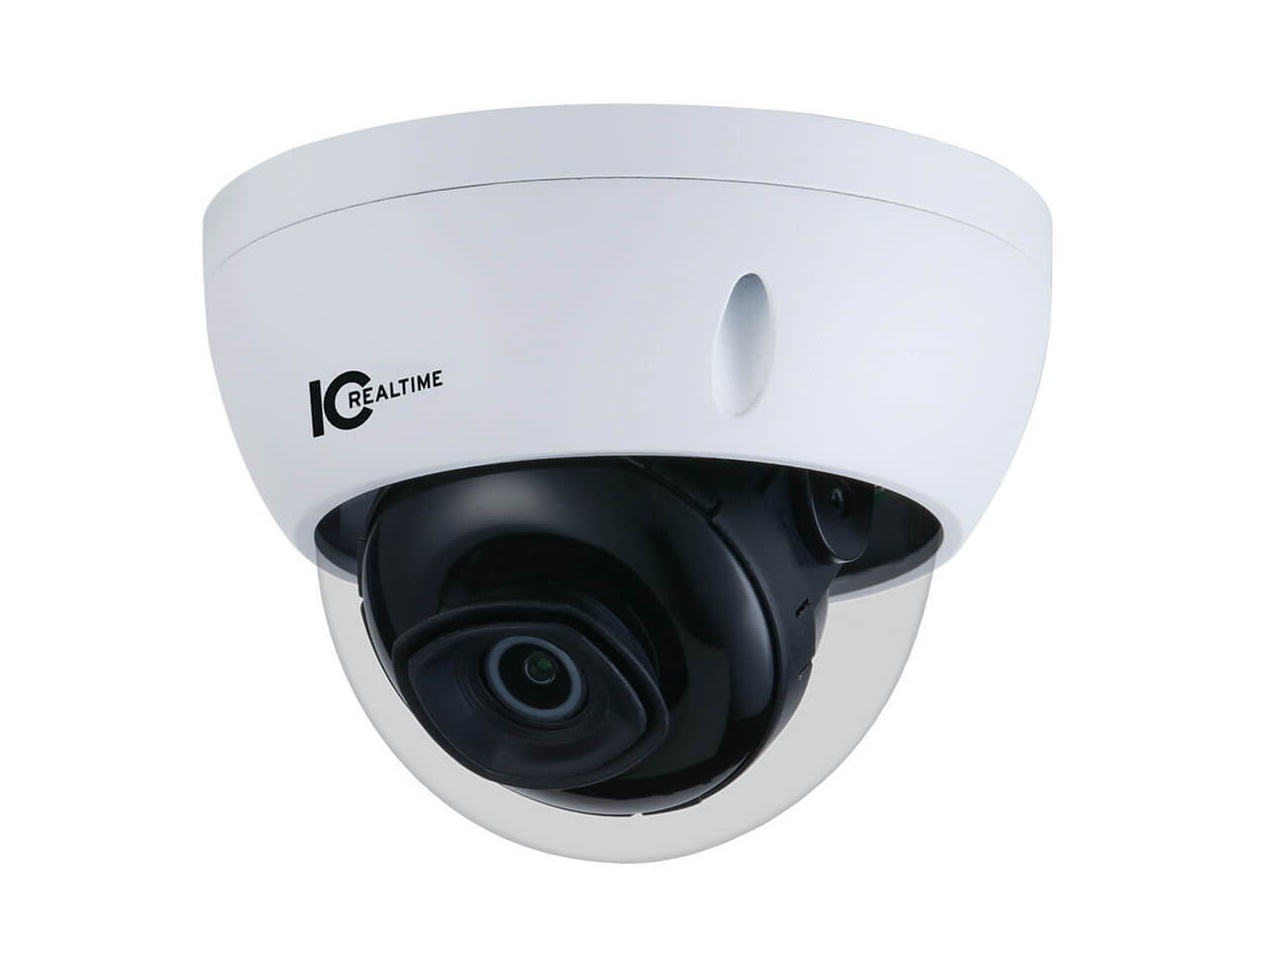 IPEG-D40F-IRW1 4MP IP Indoor/Outdoor Small Size Vandal Dome Camera/Fixed 2.8mm Lens/98ft Smart IR/PoE Capable by ICRealtime